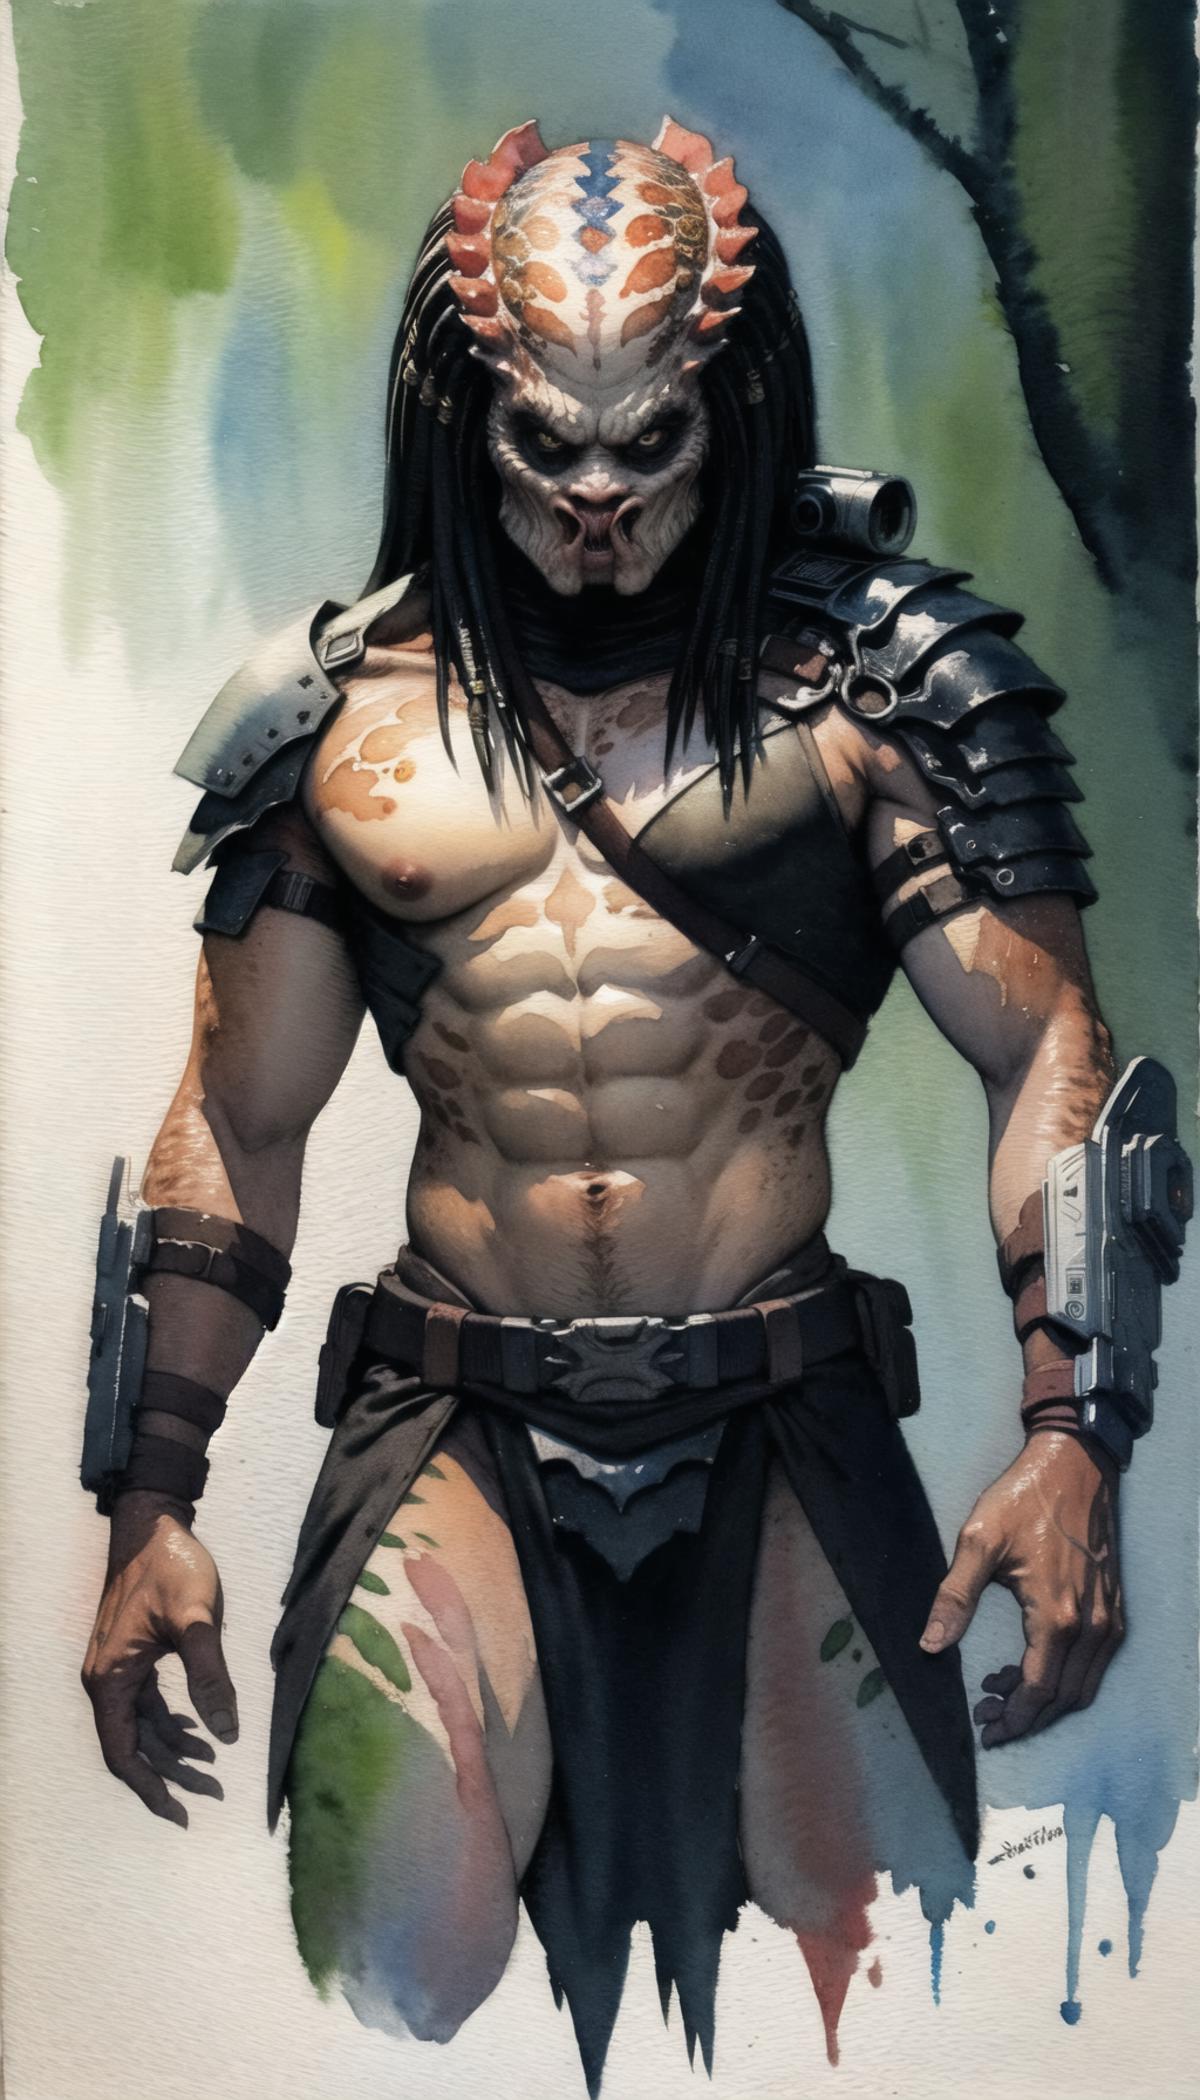 A shirtless man with a spear and a necklace.